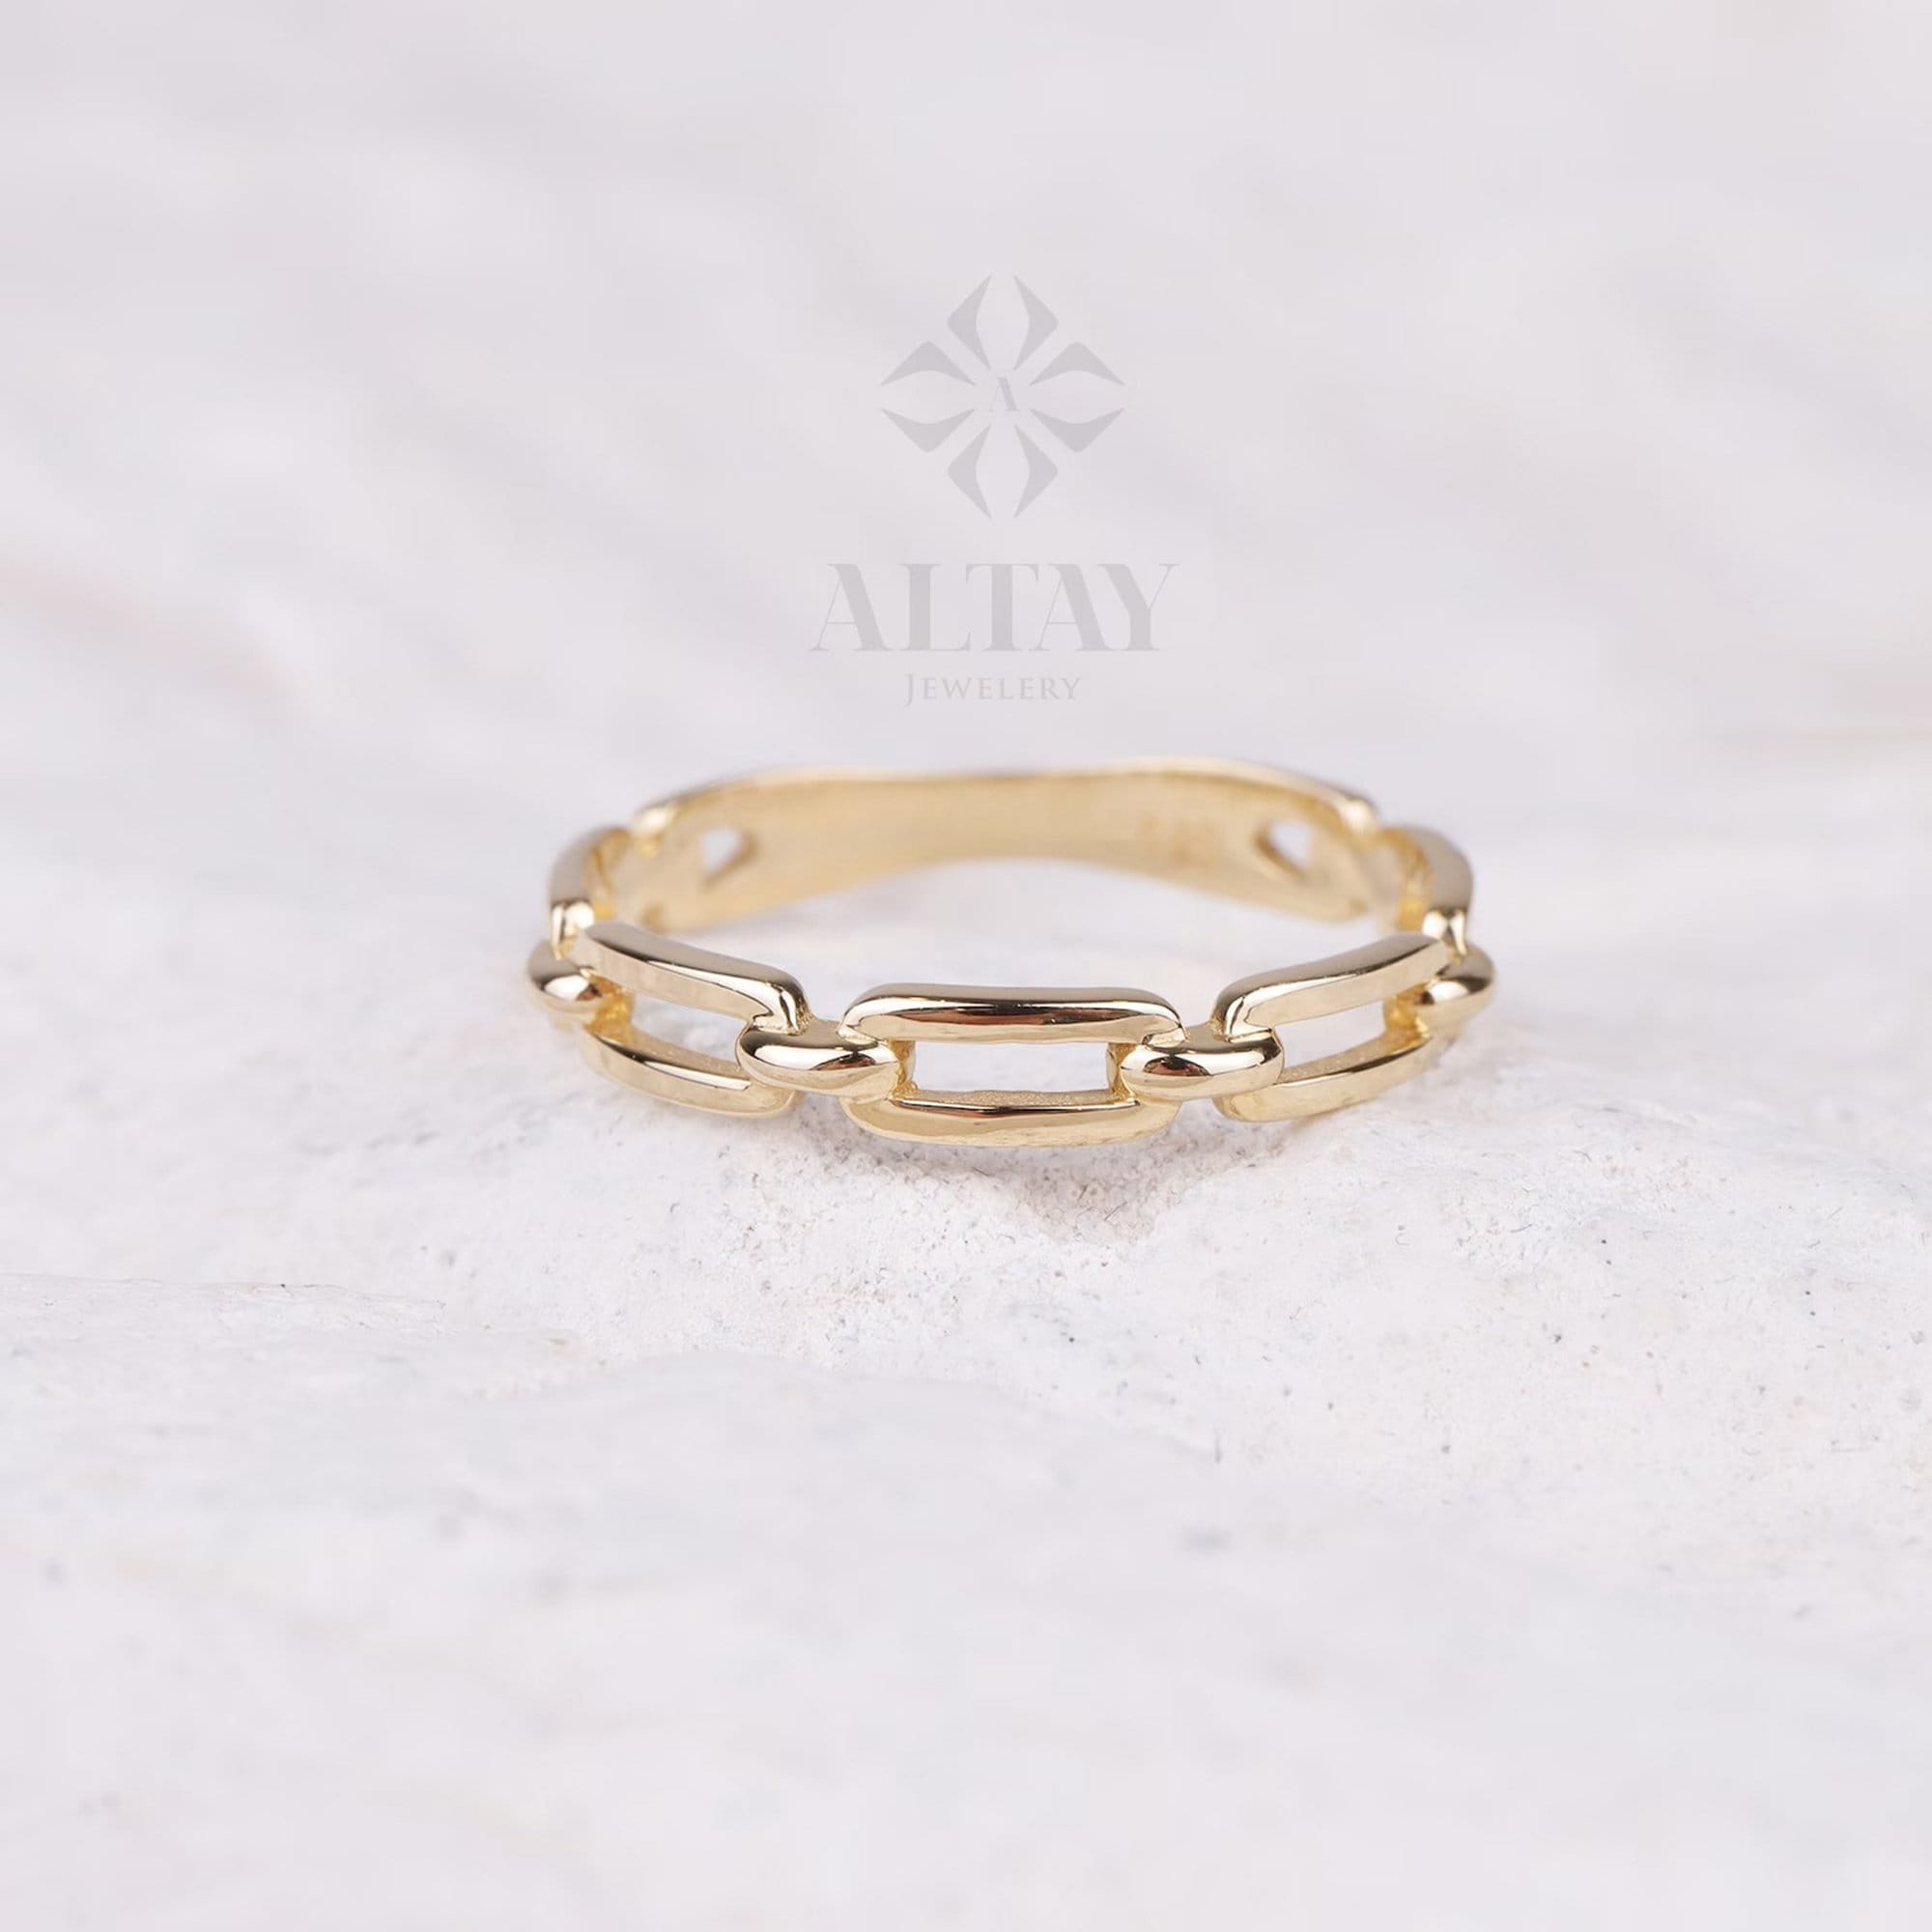 14K Gold Paperclip Chain Ring, Gold Chain Link Ring, Pointer Finger Ring, Stacking Ring for Women, Minimalist Wedding Ring, Handmade Band